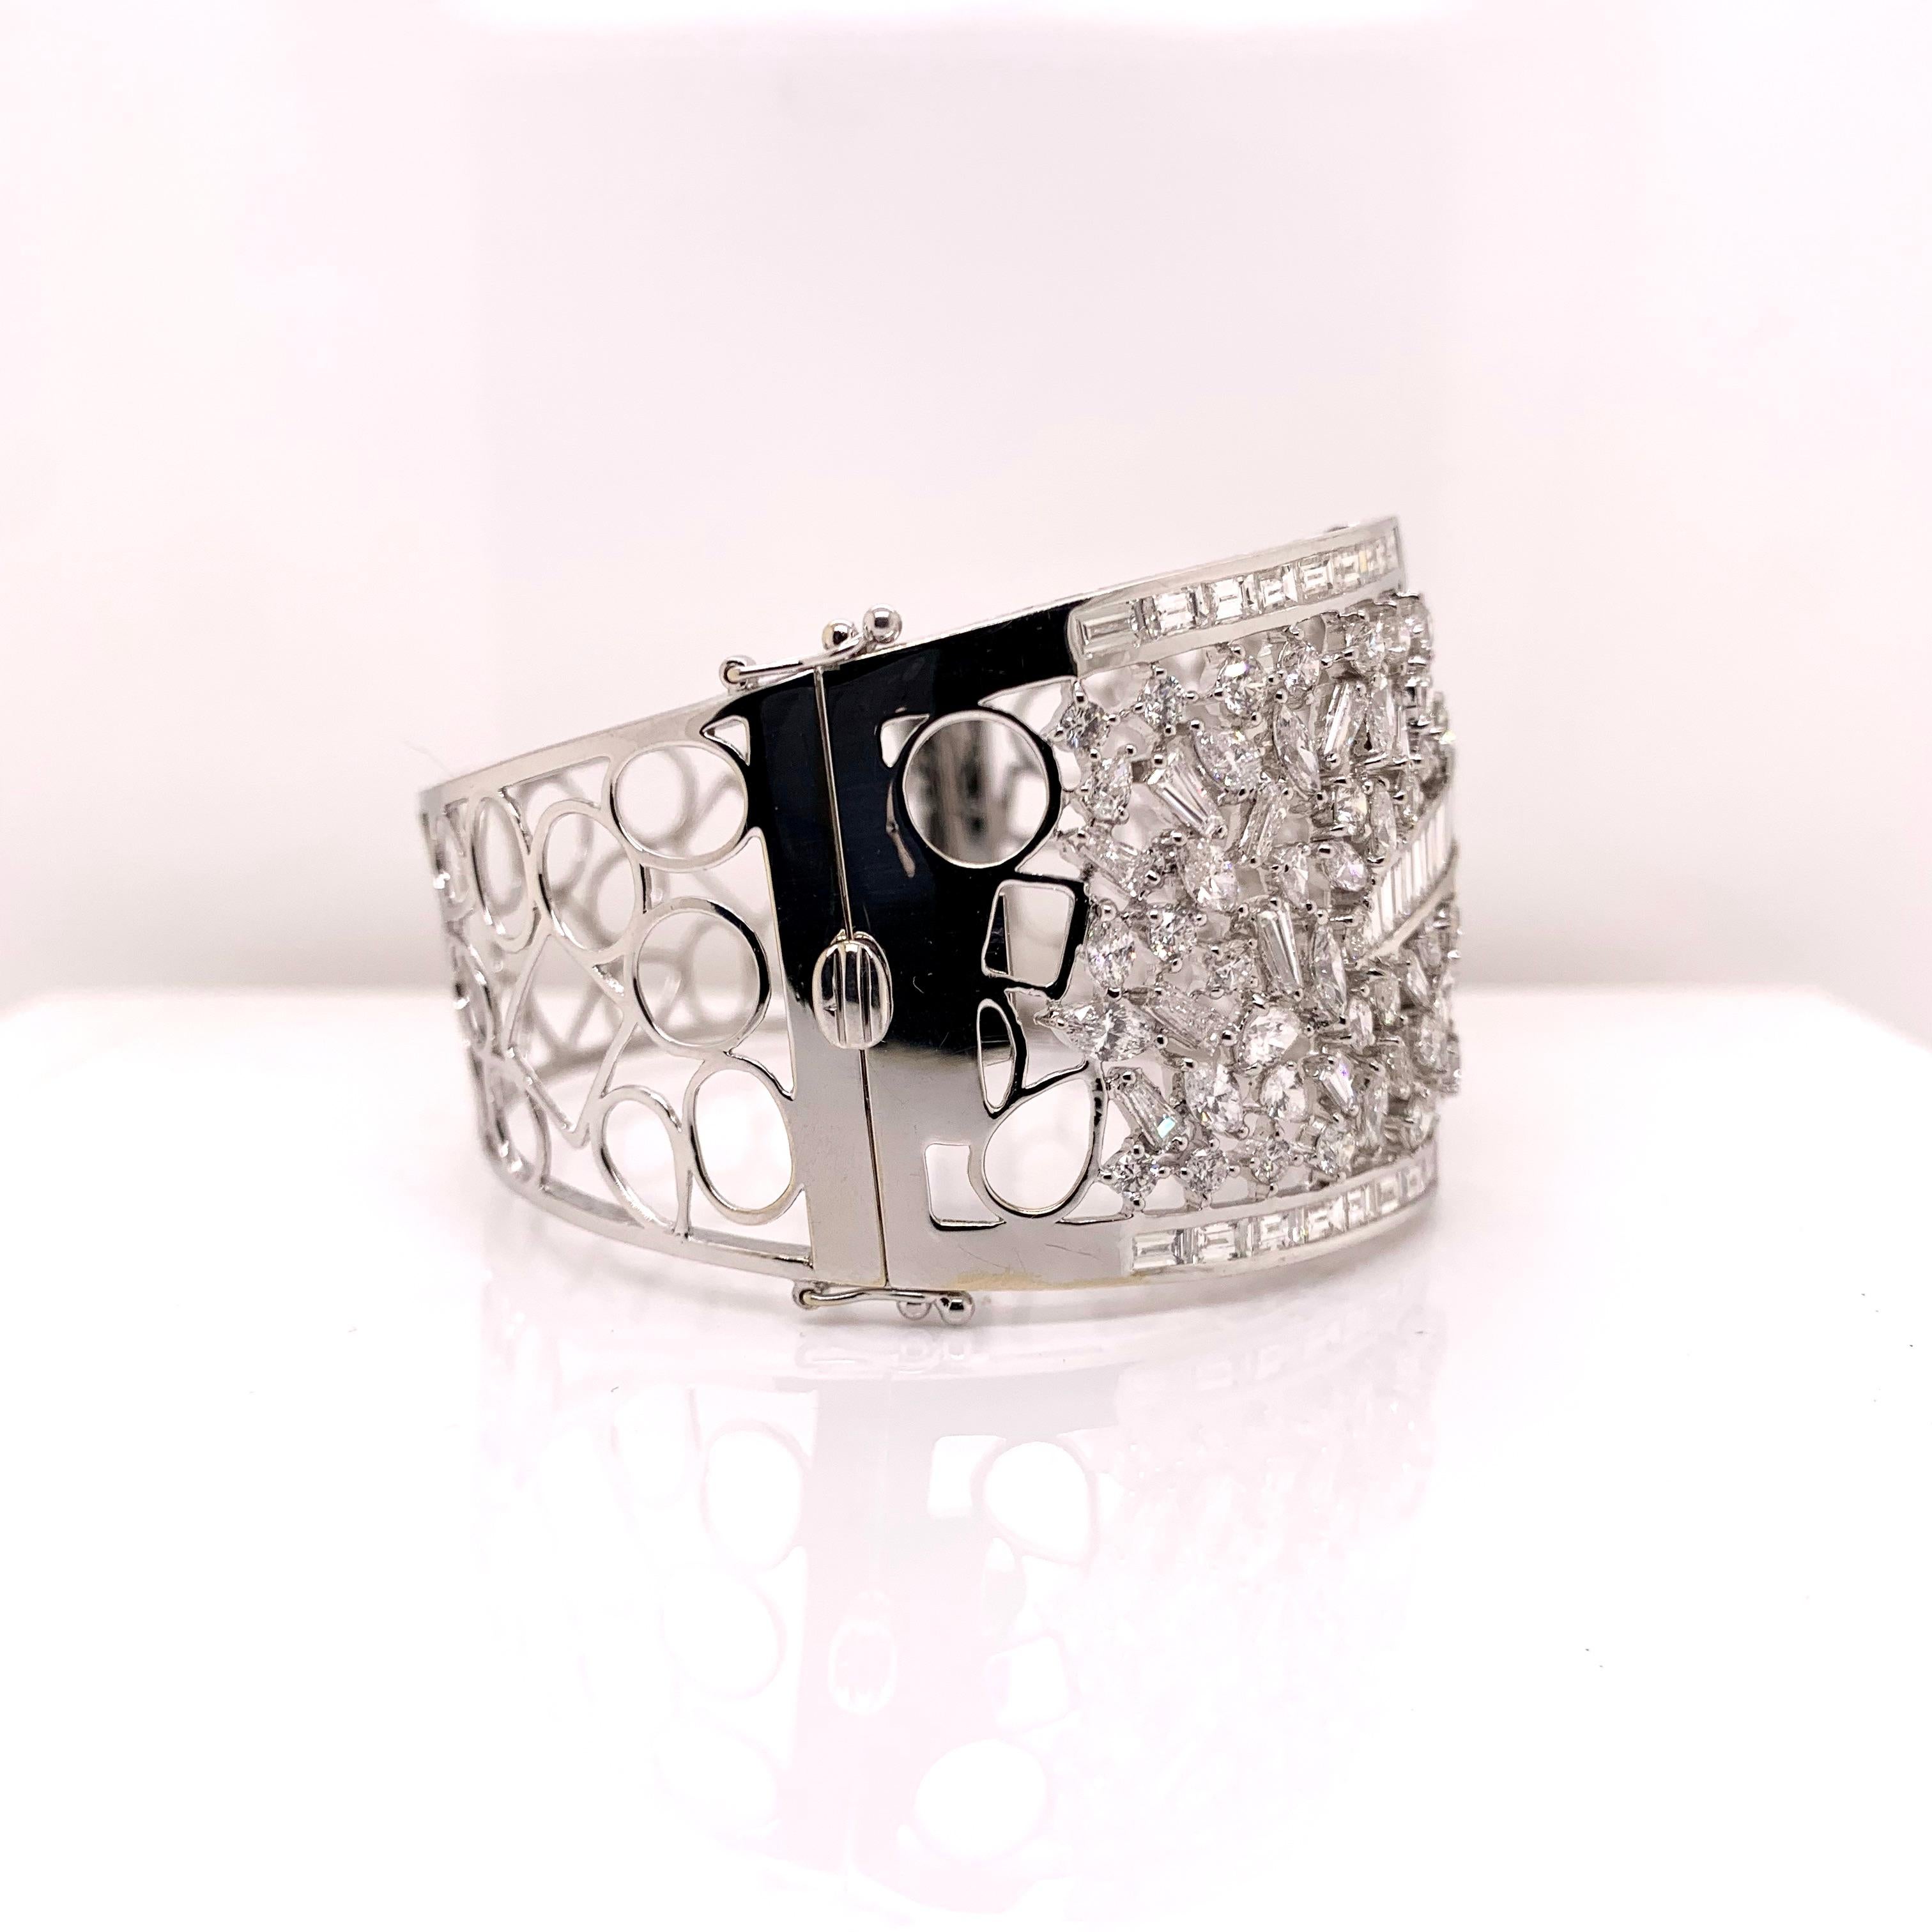 This wide diamond cuff is a statement piece!  This gorgeous cuff has an arrangement of round brilliant, baguette, marquise, and baguette diamonds that are tastefully arranged in this 18k white gold mounting.

Diamonds : 17.01 cts
Metal:  18k White